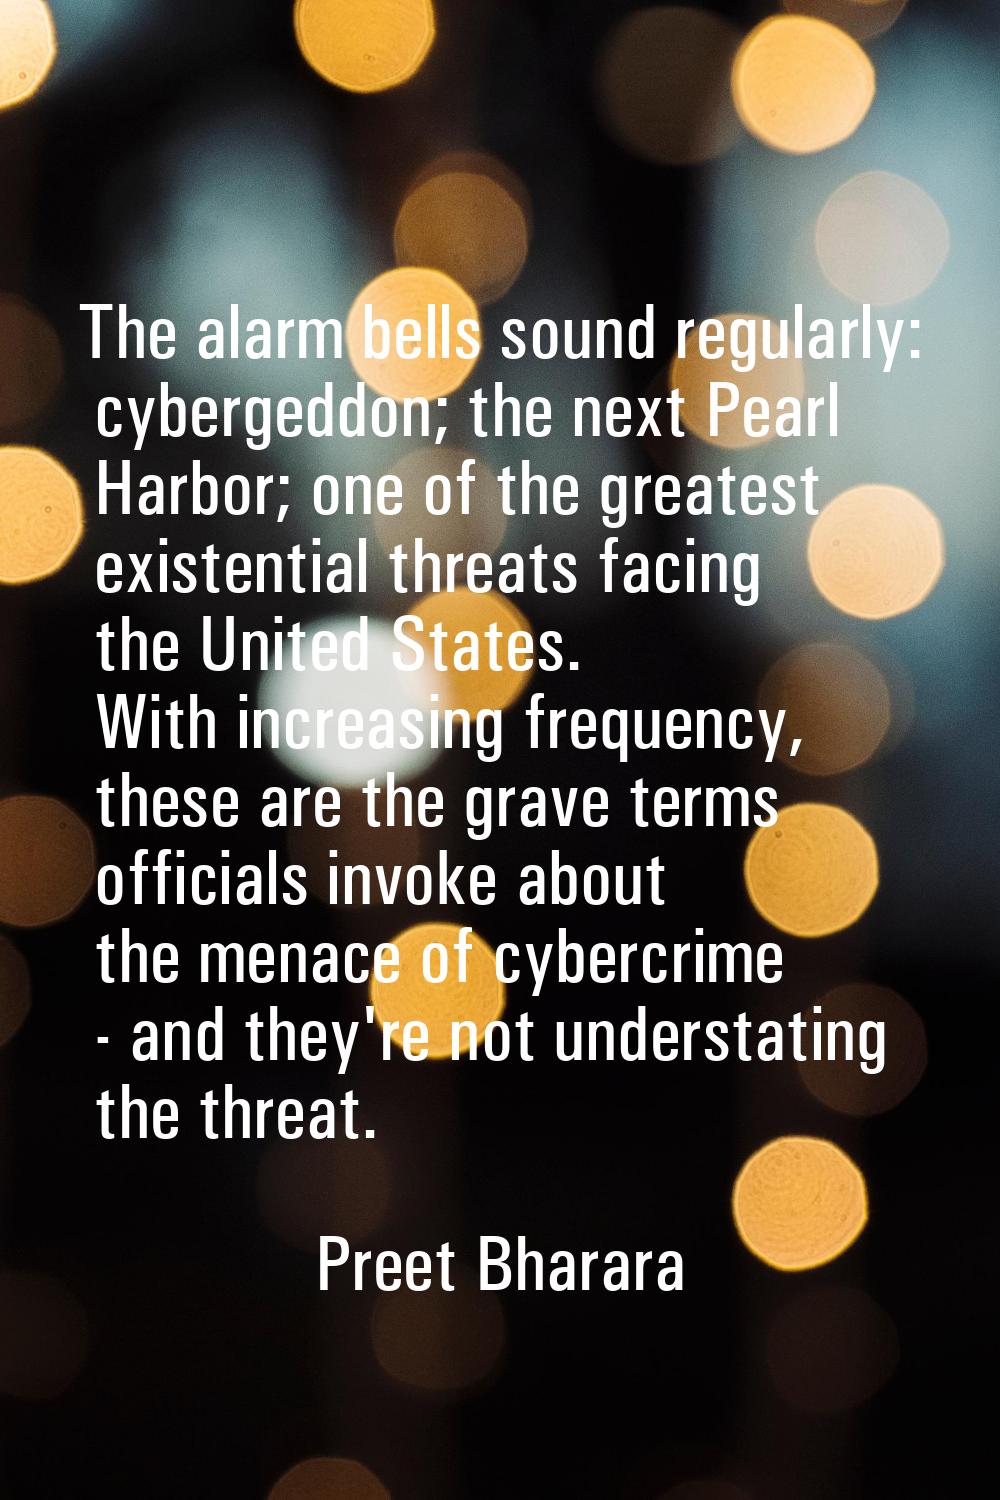 The alarm bells sound regularly: cybergeddon; the next Pearl Harbor; one of the greatest existentia